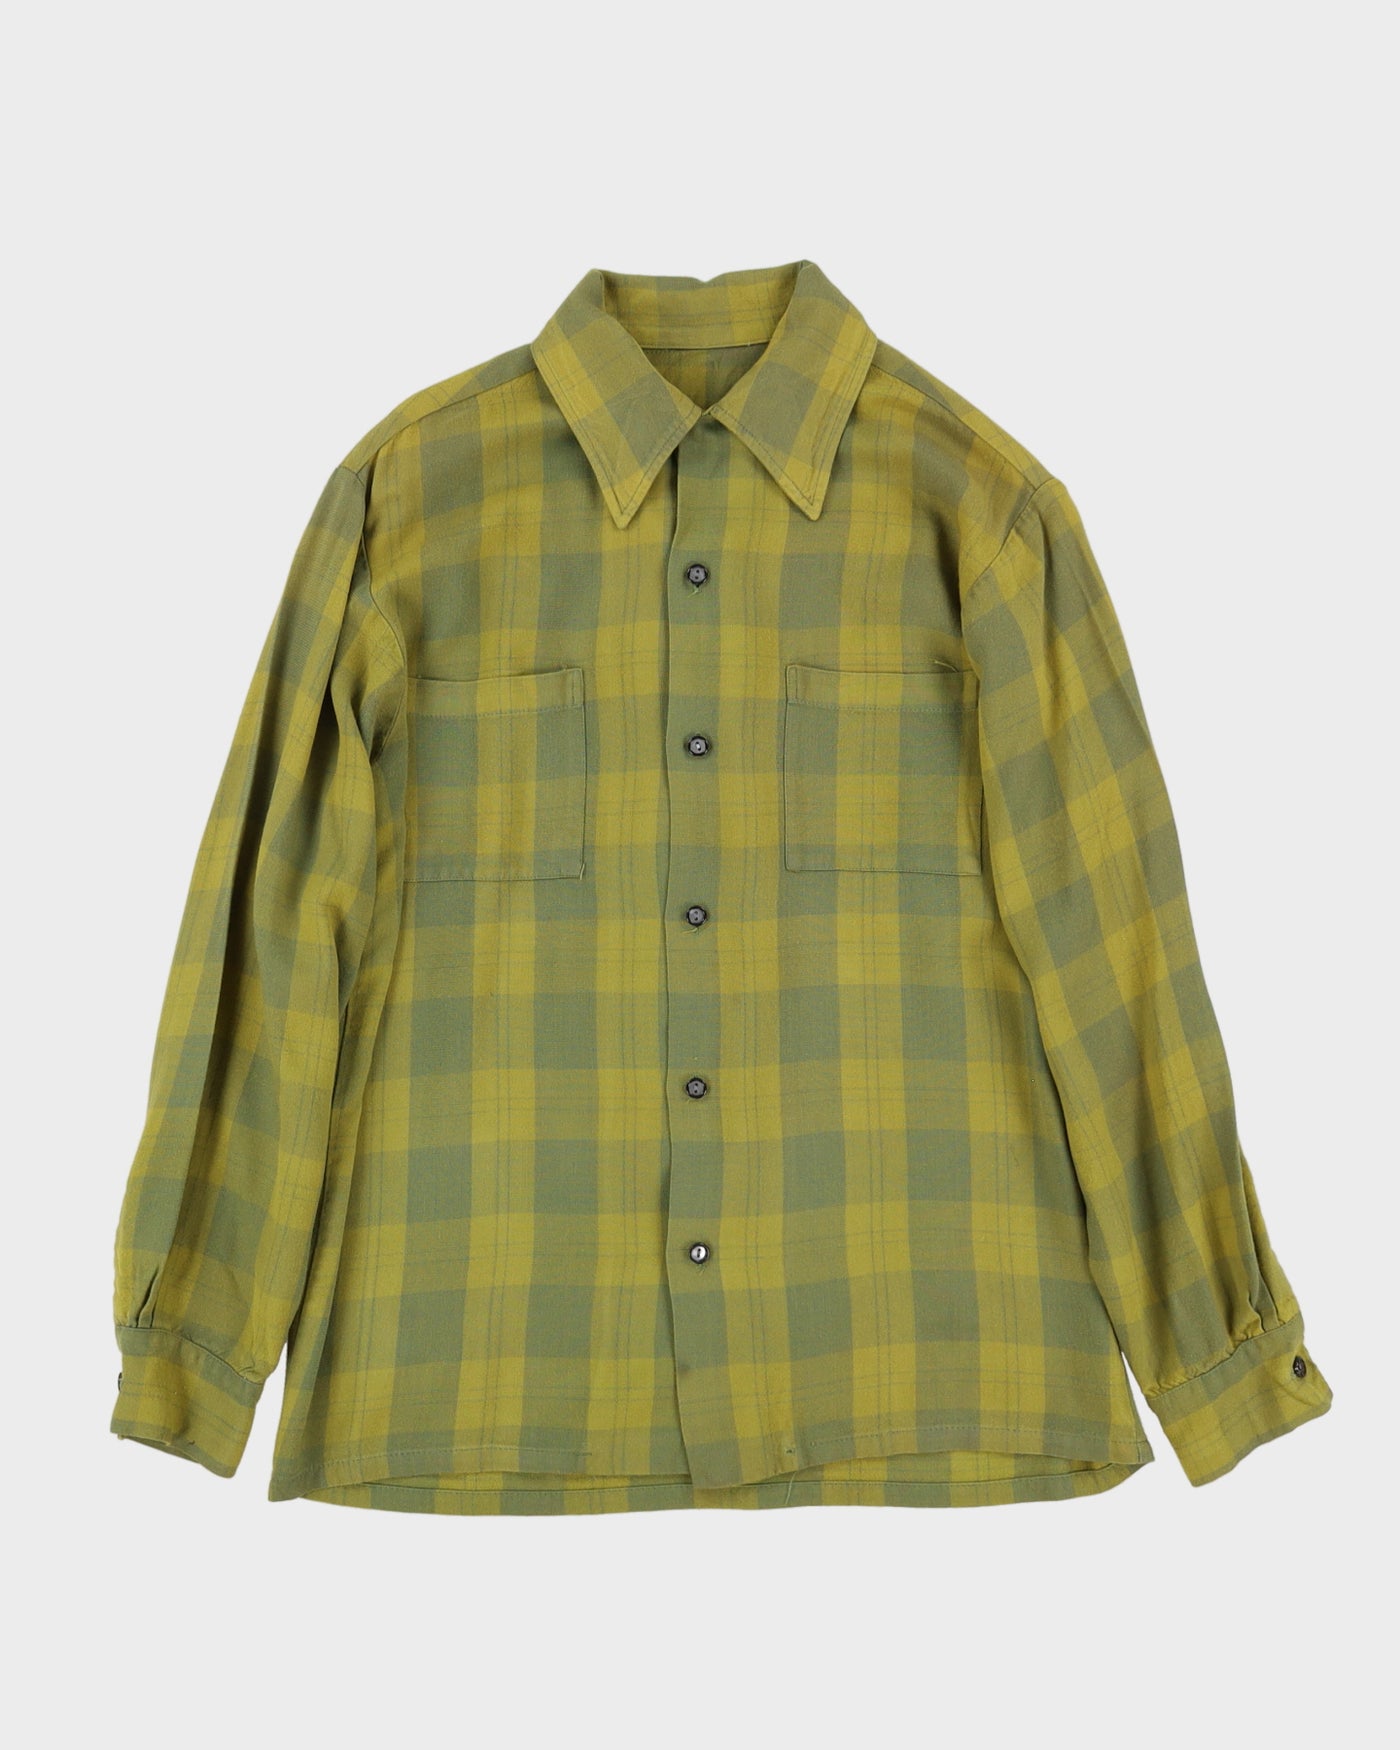 1950s Green Checked Long Sleeve Shirt - S